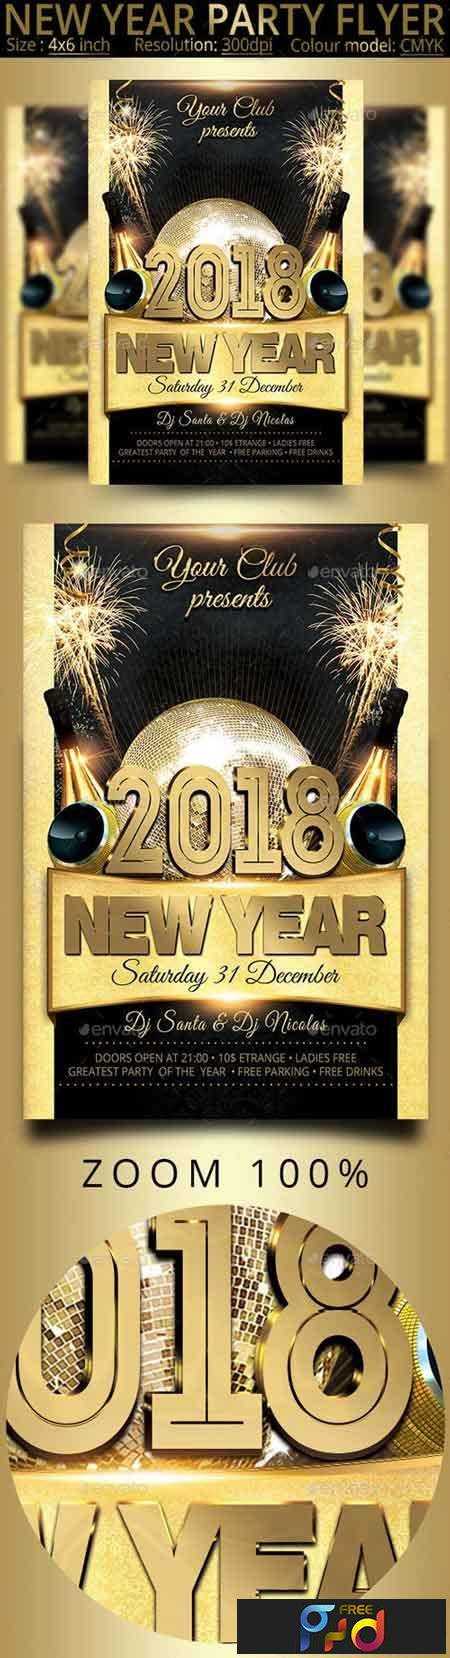 FreePsdVn.com 1706264 TEMPLATE new year party flyer 20773766